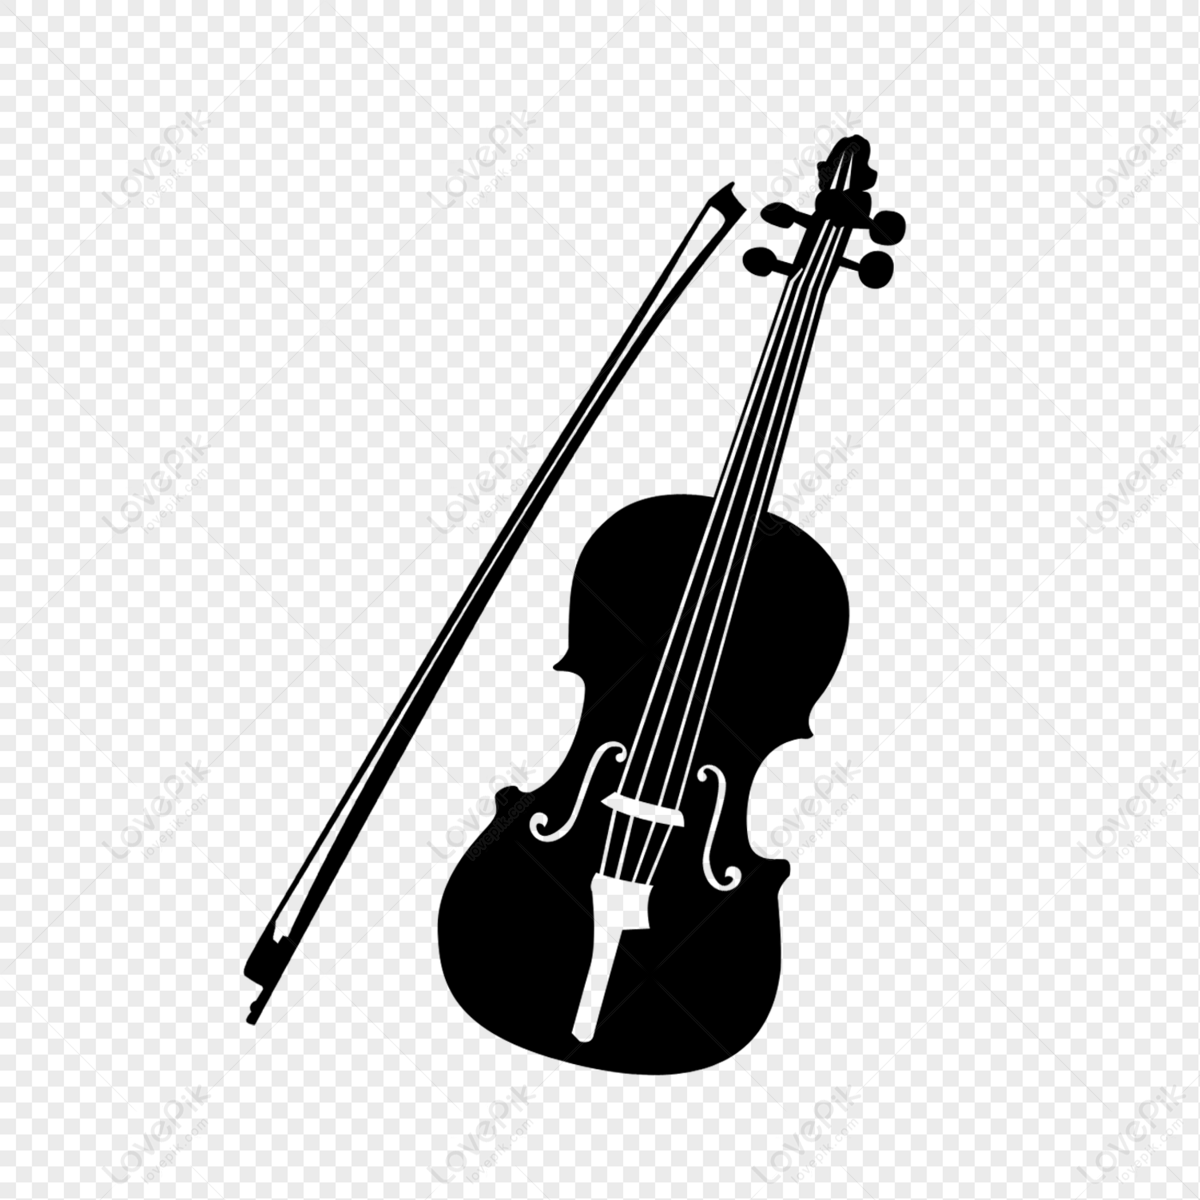 Violin PNG Image And Clipart Image For Free Download - Lovepik | 401518858